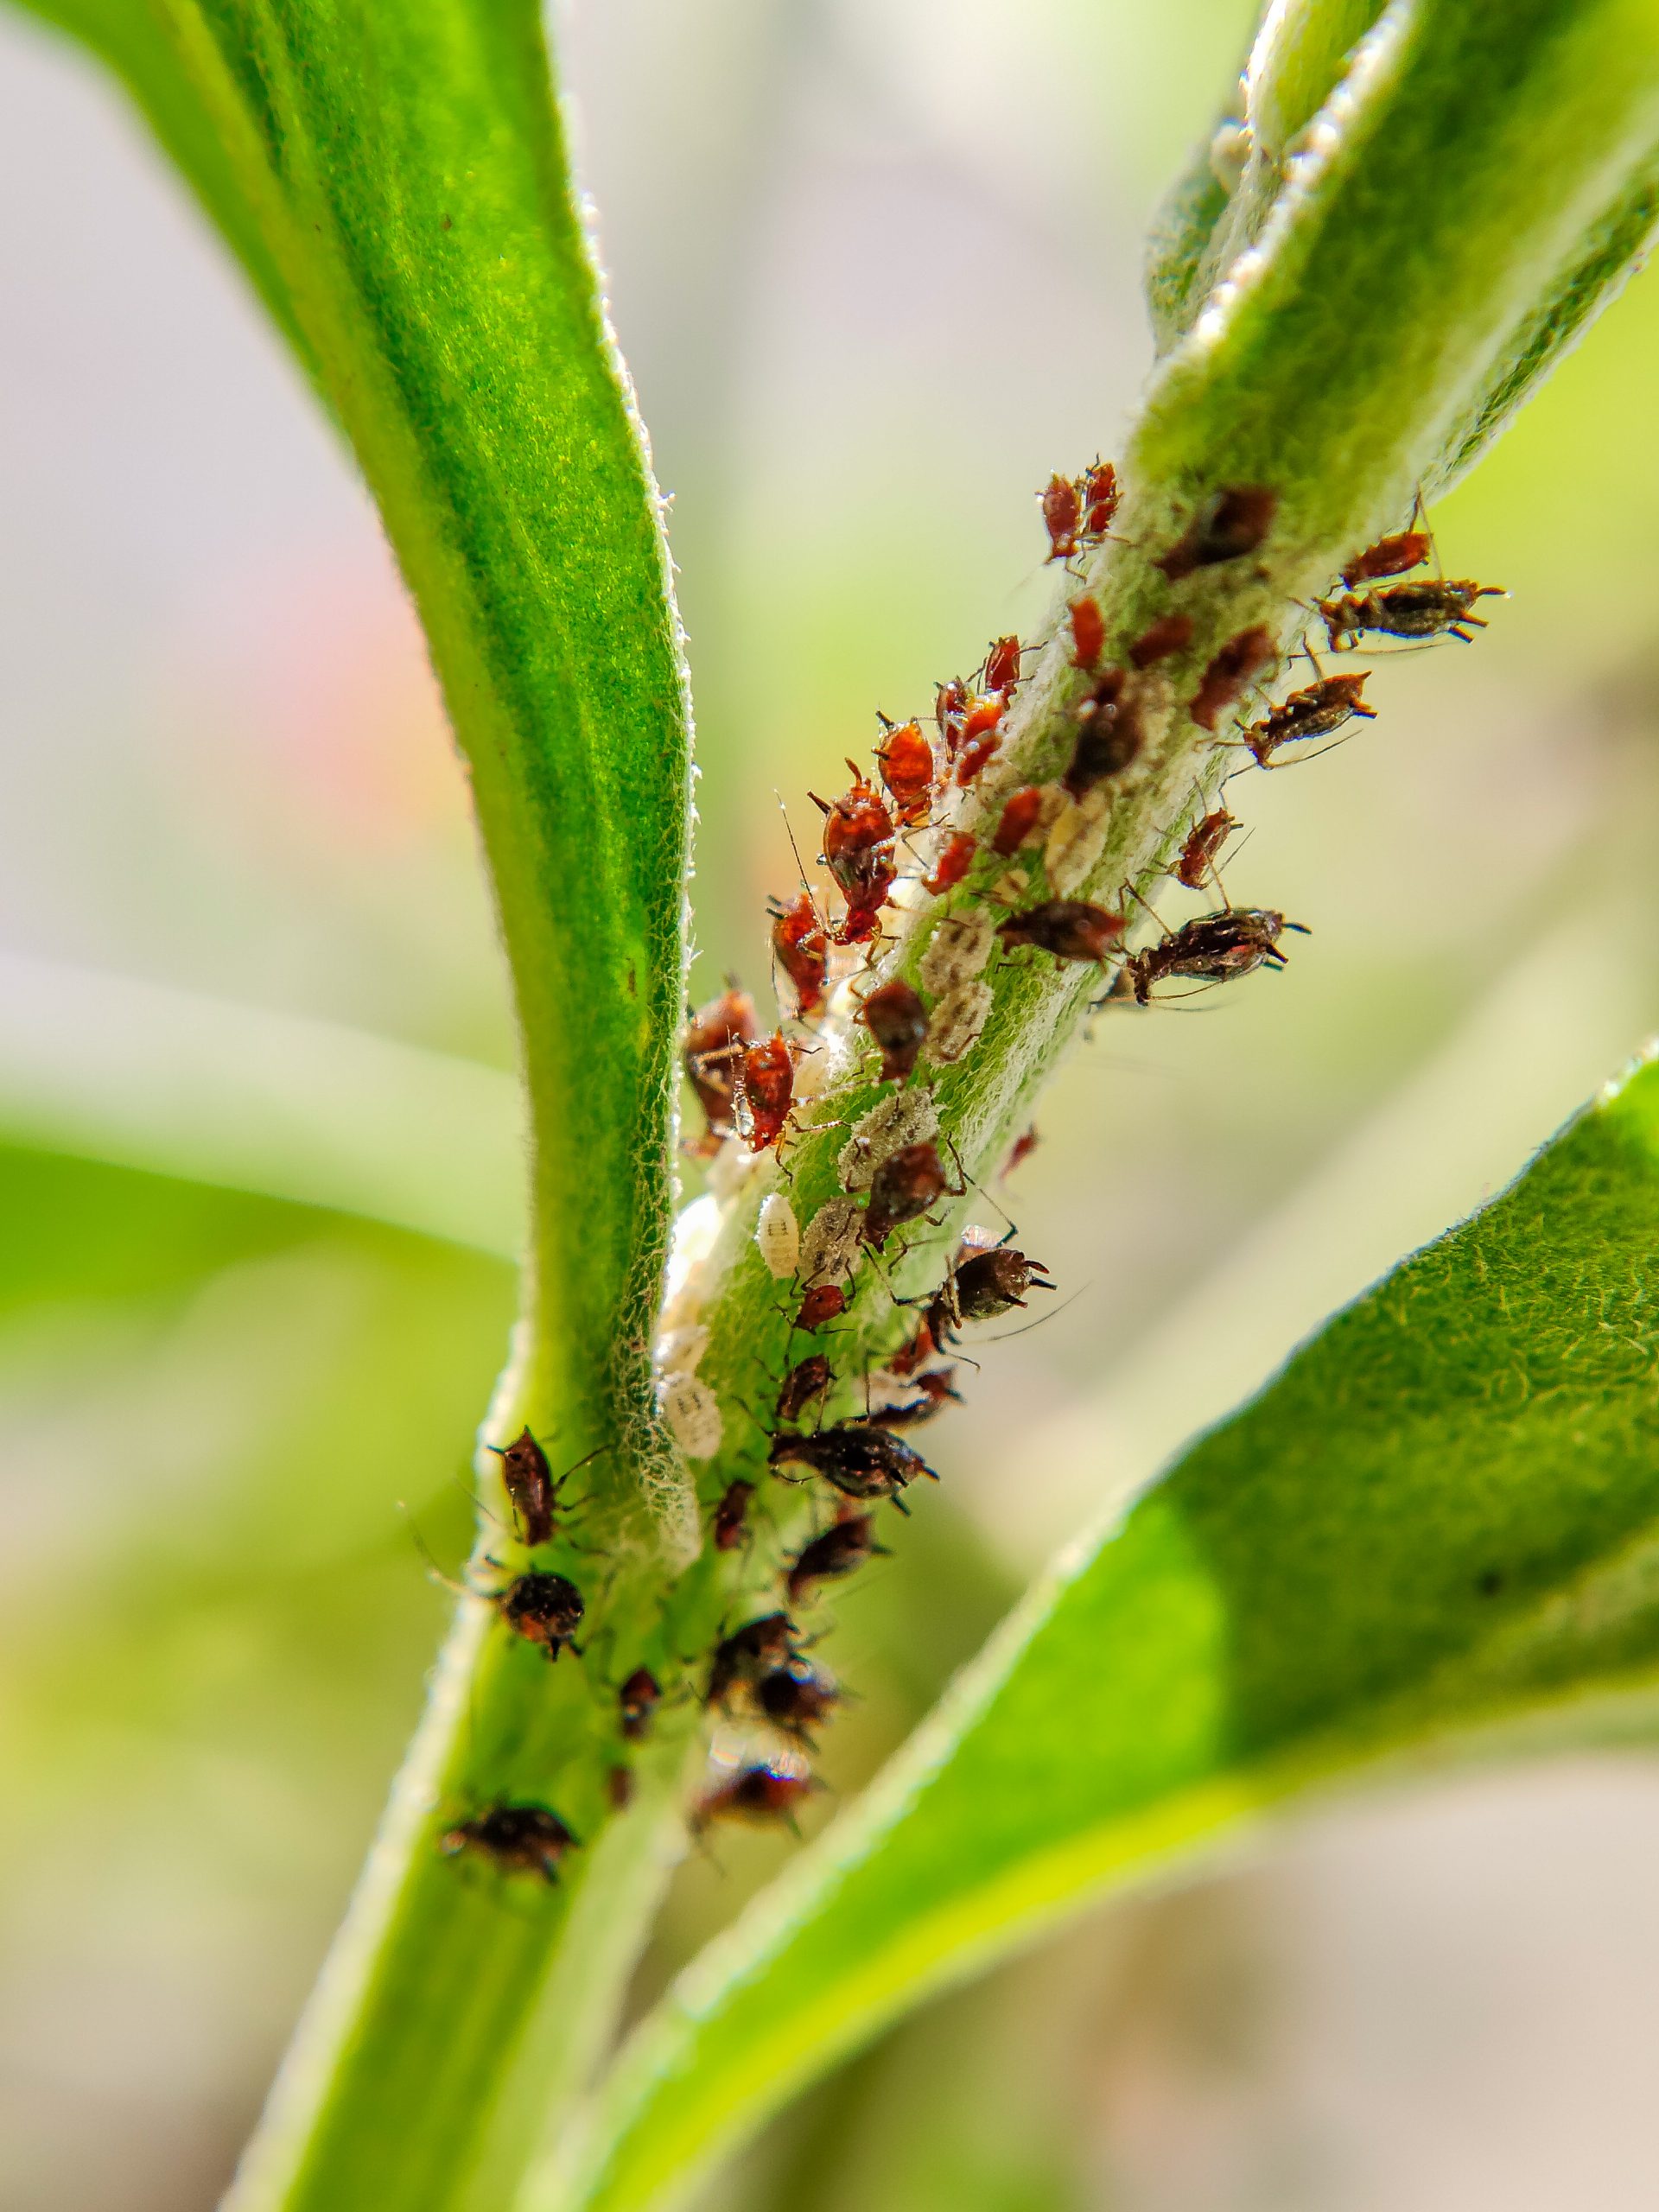 A colony of insects on a plant